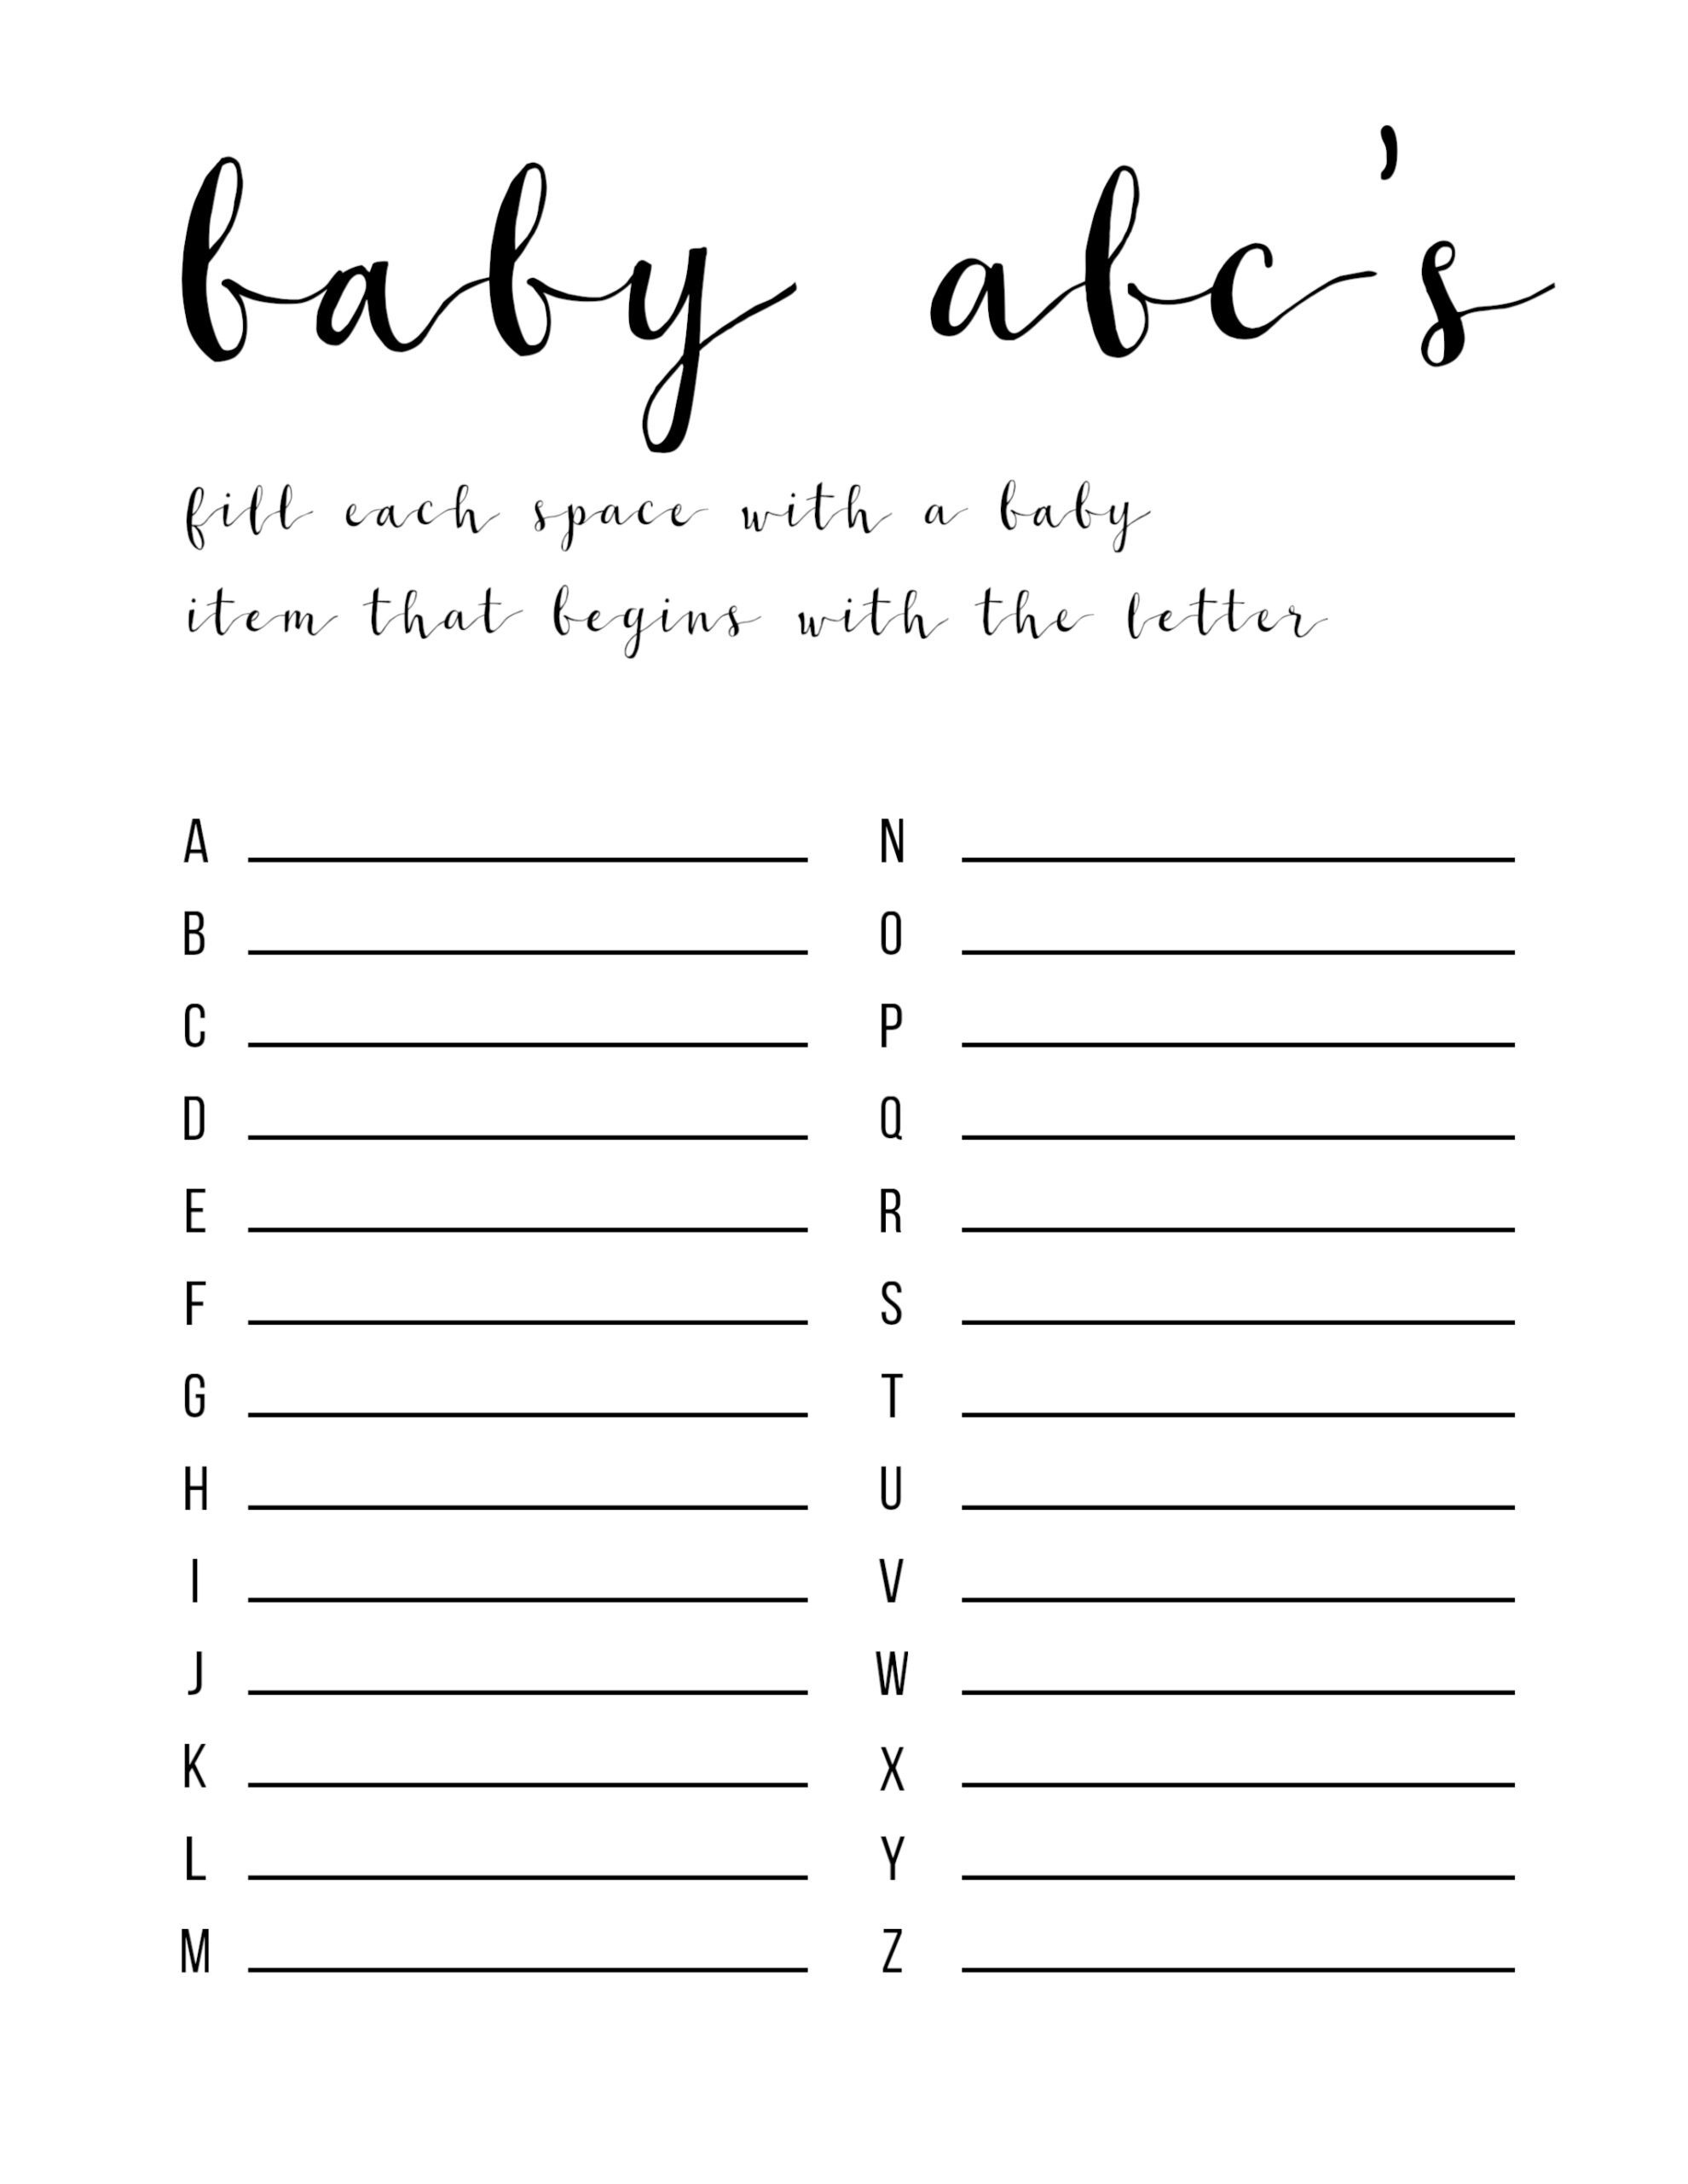 Baby Shower Games Ideas {Abc Game Free Printable} - Paper Trail Design - Free Printable Baby Shower Games